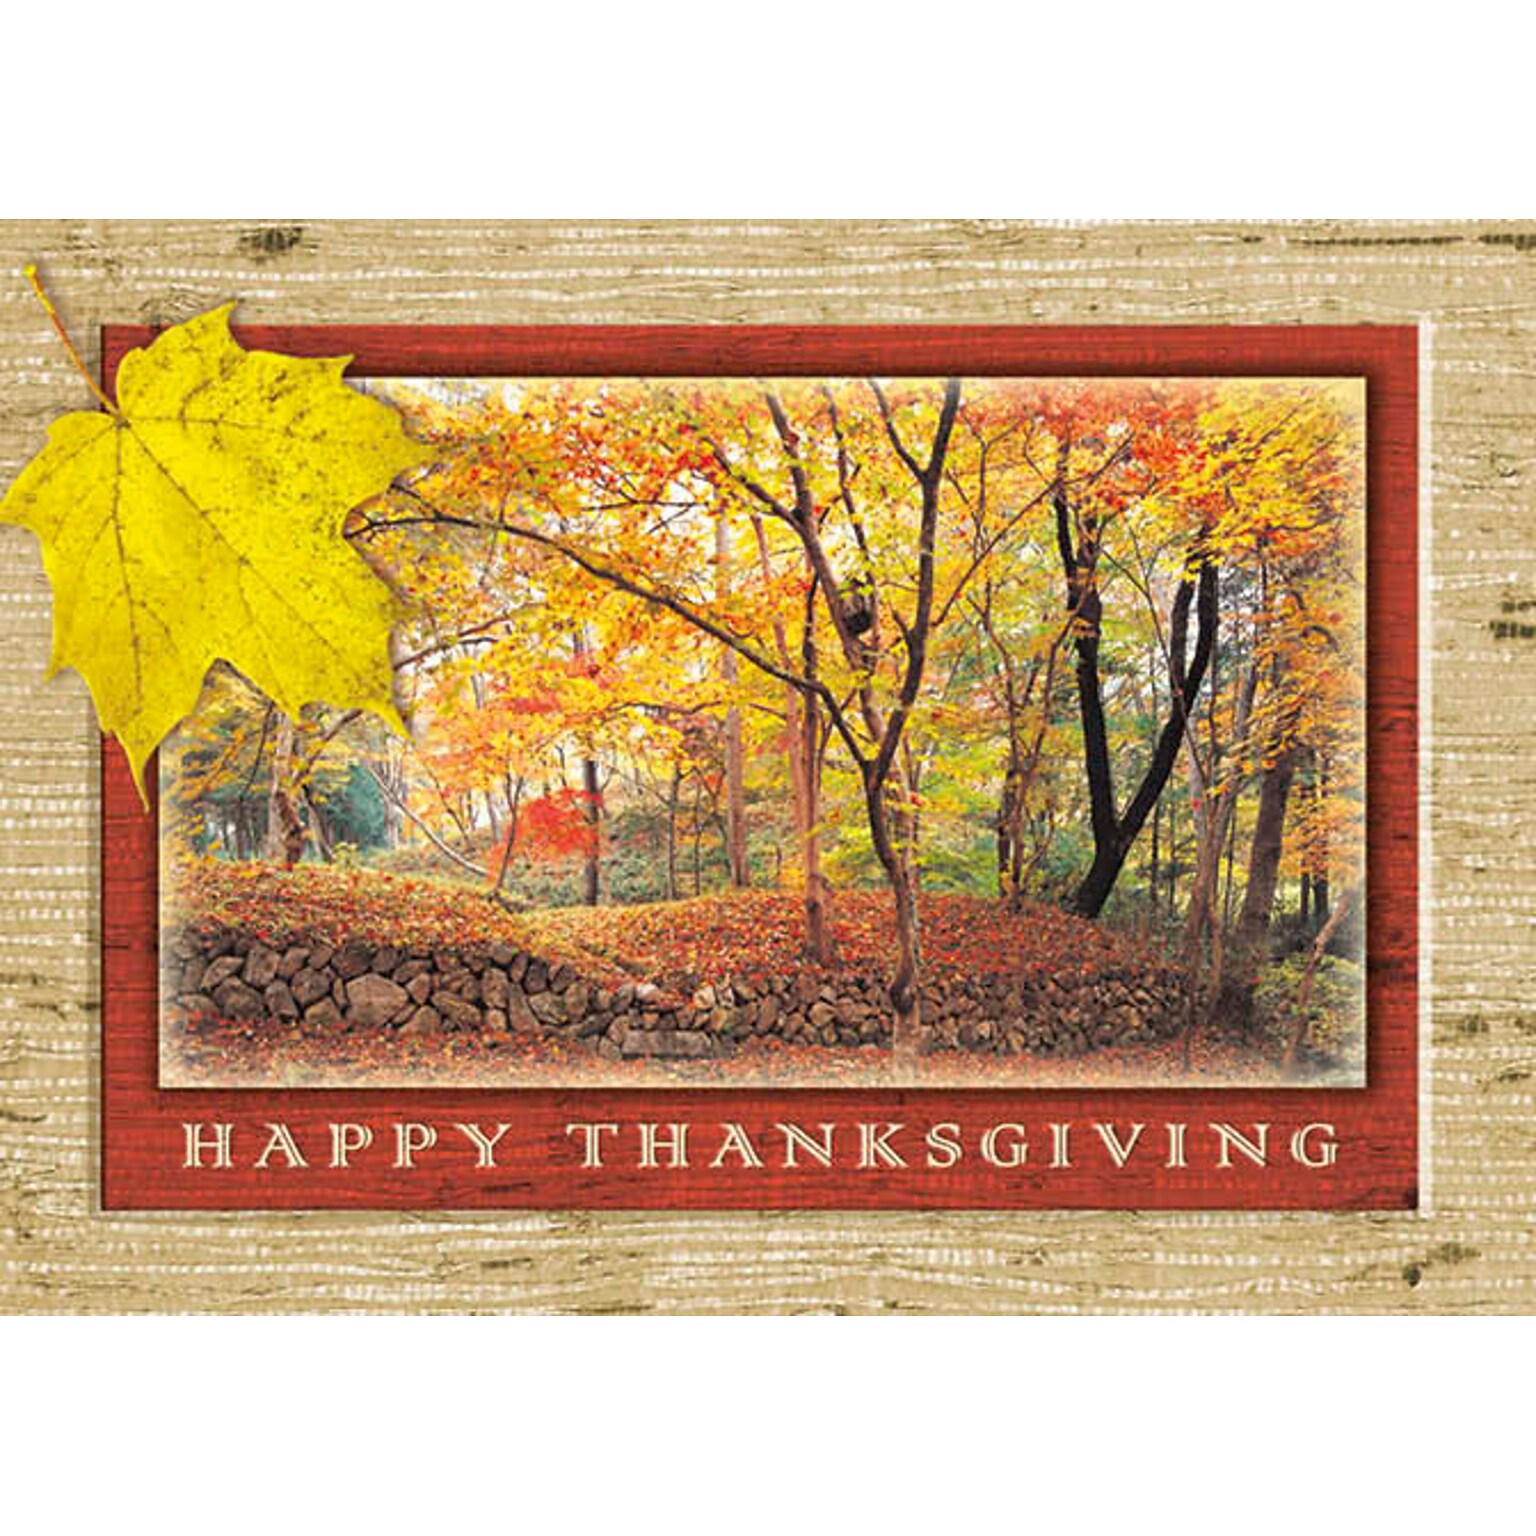 Happy Thanksgiving Fall In The Woods Seasonal Greeting Cards, With A7 Envelopes, 7 x 5, 25 Cards per Set